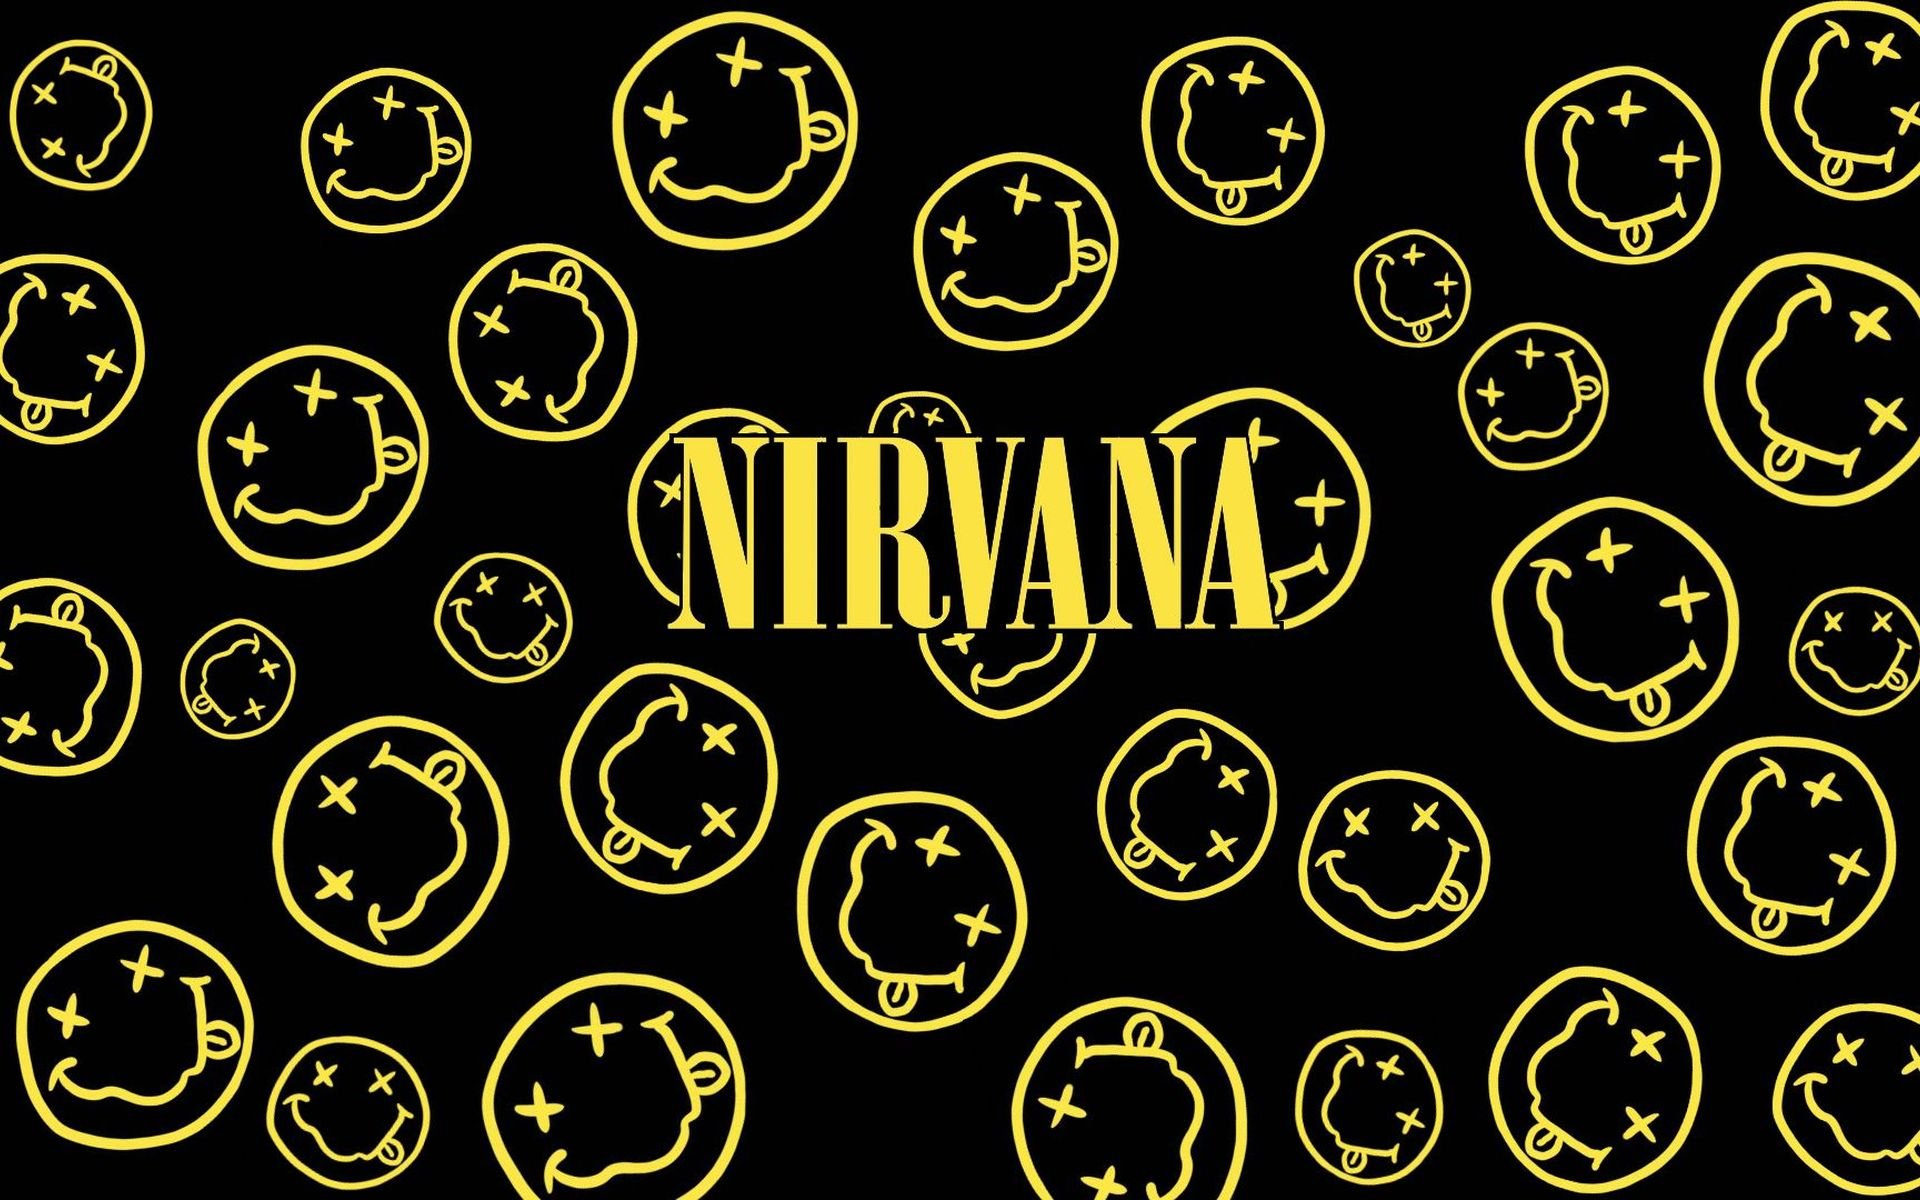 Nirvana HD Wallpaper Picture Image